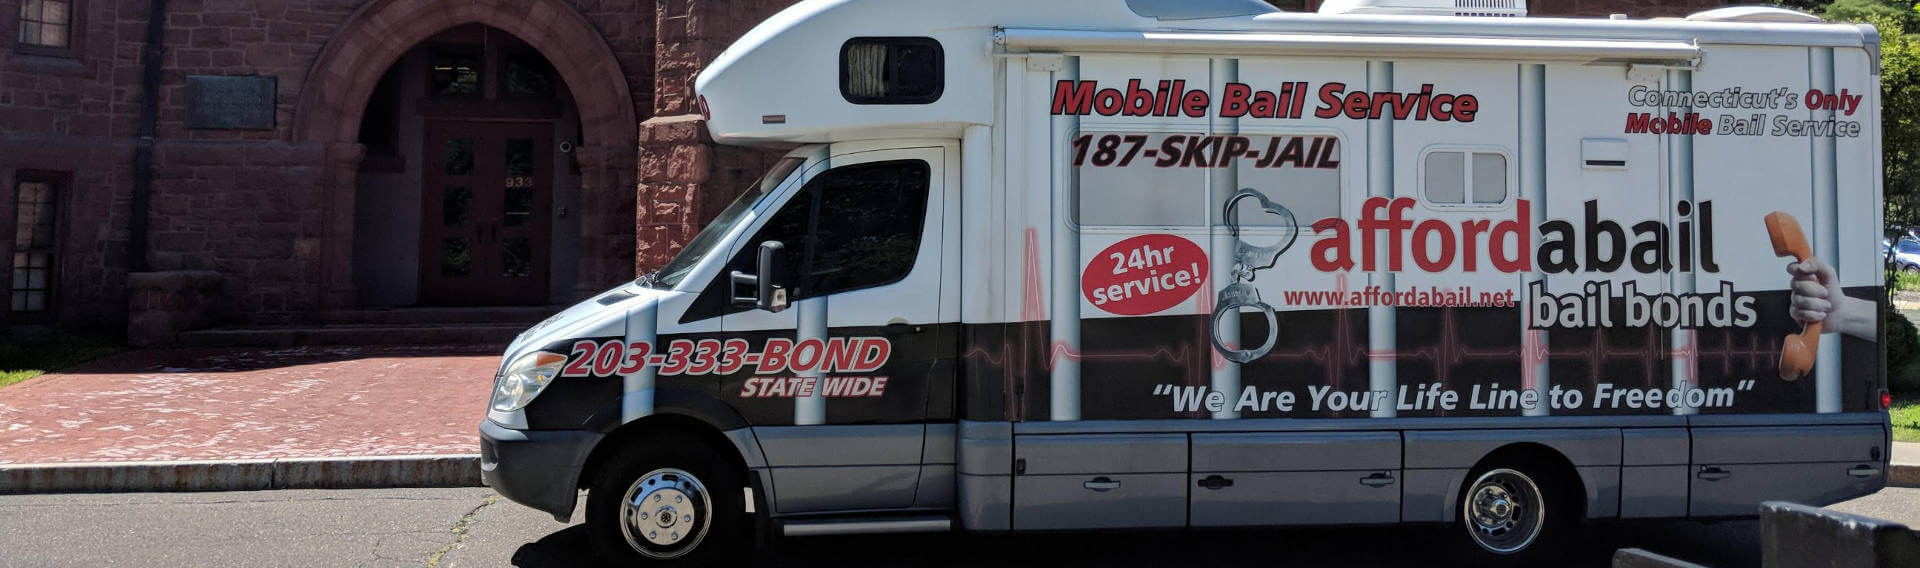 Mobile bail bonds service in Windham CT